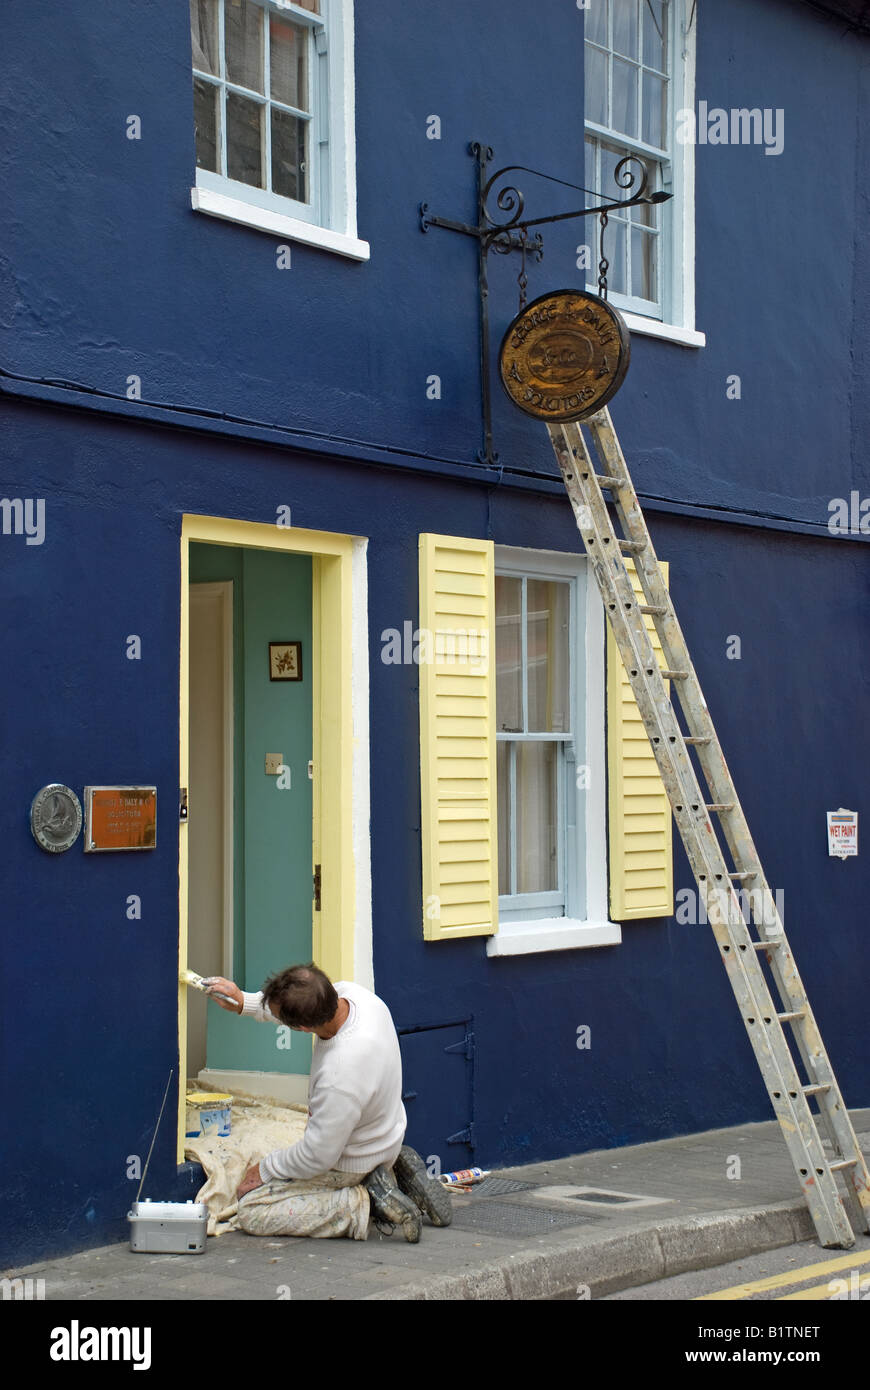 A decorator painting the doorway of a building in the centre of Kinsale, Co Cork, Ireland. Stock Photo